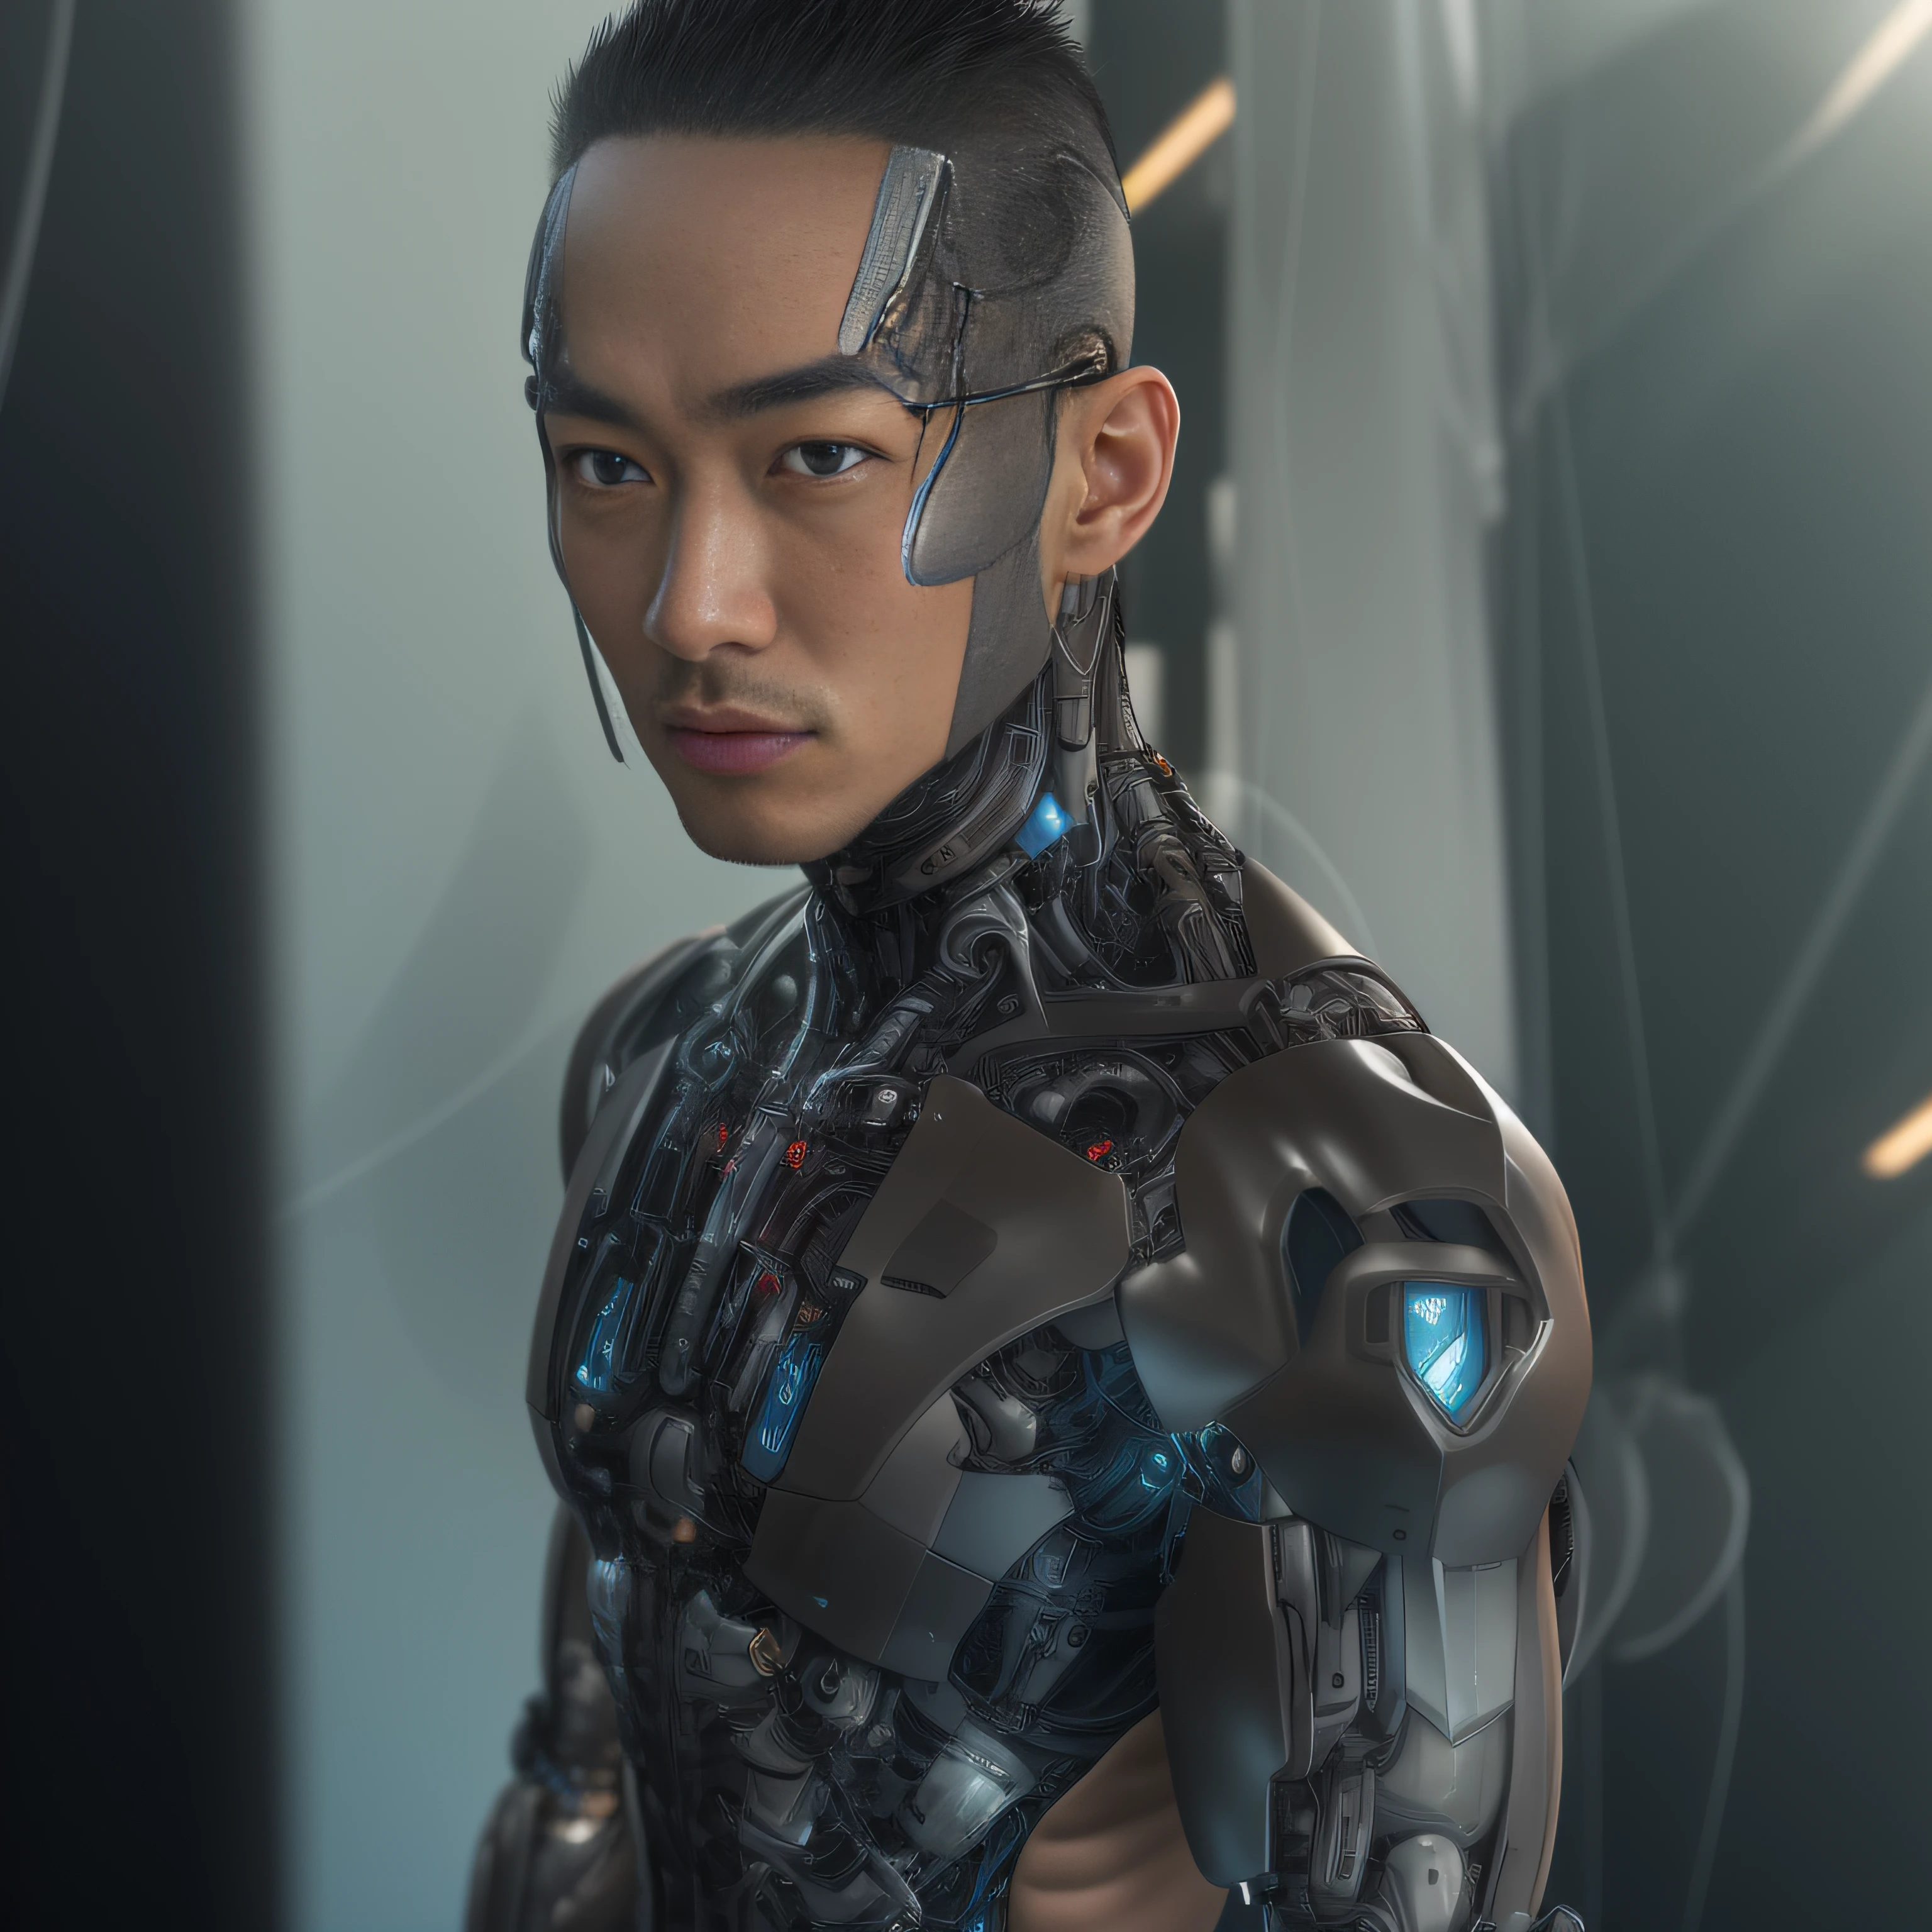 (Alfed man wearing black transparent latex tong，Translucent latex tong：1.5)，（Metallic body, bionic scifi alexandre ferra, cyborg neck, cyborg male, male cyborg：1.2）（cyborg fashion model, portrait of a cyborg, detailed portrait of a cyborg, cybernetic neck implant, portrait of a futuristic robot ：1.3）（dystopian sci-fi character, sci - fi character, portrait of a cyberpunk cyborg：1.2）（8K，Extreme detail，Hair in extreme detail，Ultra photo realsisim，cinmatic lighting：1.1）（Asian supermodel face，Strong muscles and perfectly curved body，Extreme sexual tension，Hormonal explosion，whole body display：1.5）(Detailed and realistic skin texture：1.2)（Short hair, Short stubble masculinity，Naked muscle man，Muscular macho，No clothes on，Only a pair of thongs was worn，Extremely sexy and provocative：1.5)(The lower body is swollen and erect：1.2)